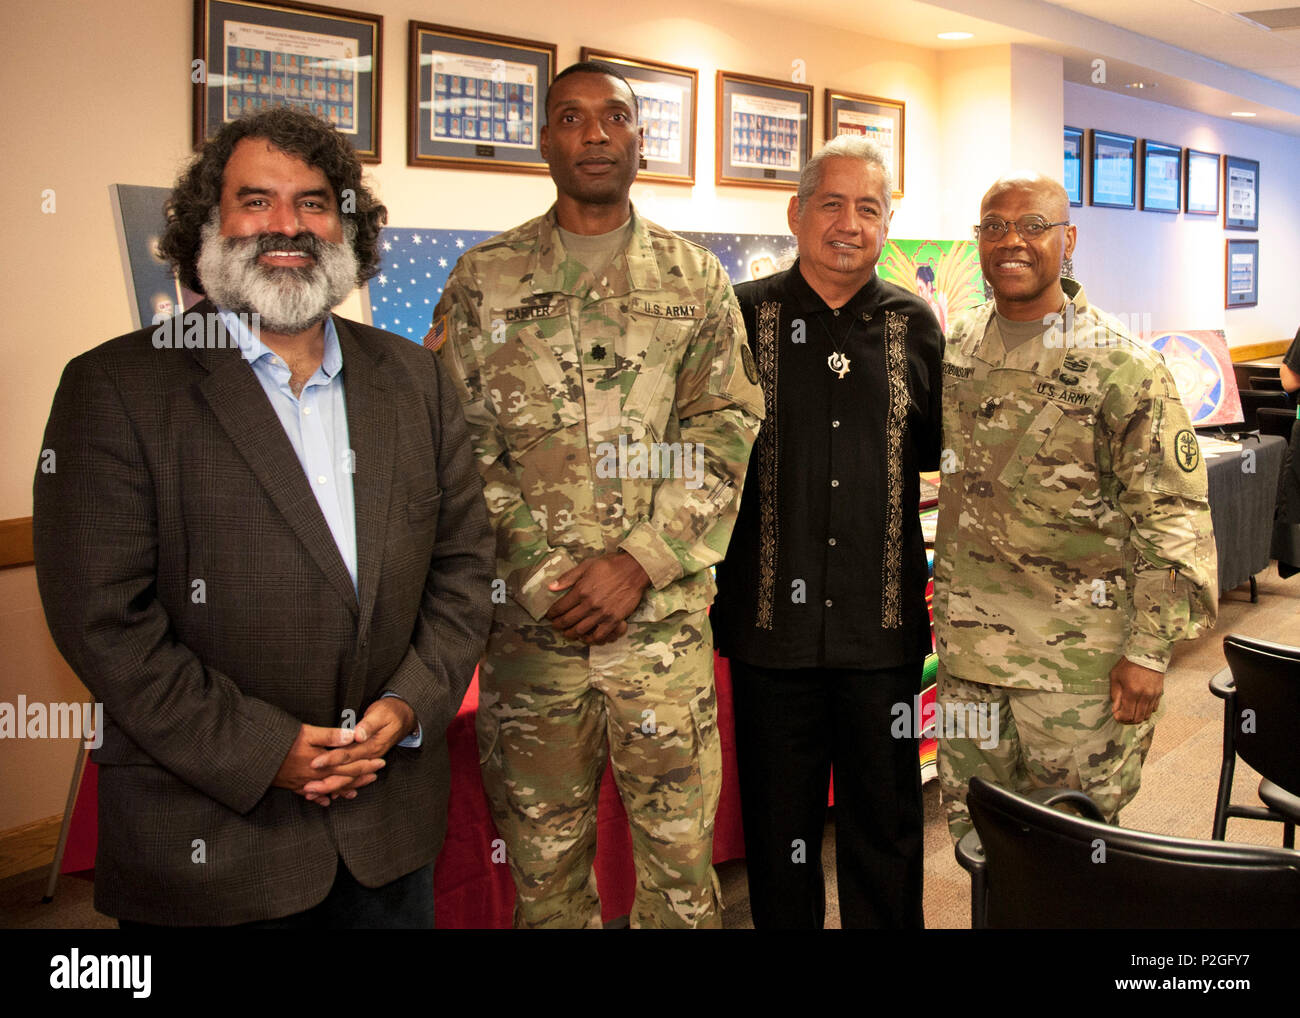 (From right to Left) Dr. Larry Valero, director of the National Security Studies Institute at the University of Texas at El Paso, Lt. Col. Bruce Carter, commander of the Fort Bliss Warrior Transition Battalion, El Paso artist Gabriel S. Gaytan, and Command Sgt. Maj. Anthony C. Robinson, acting command sergeant major, William Beaumont Army Medical Center, pose for a photo during the William Beaumont Army Medical Center’s Hispanic Heritage Month Observance held Sept. 14, 2016 at Fort Bliss, Texas.    (U.S. Army photo by Marcy Sanchez, William Beaumont Army Medical Center Public Affairs) Stock Photo